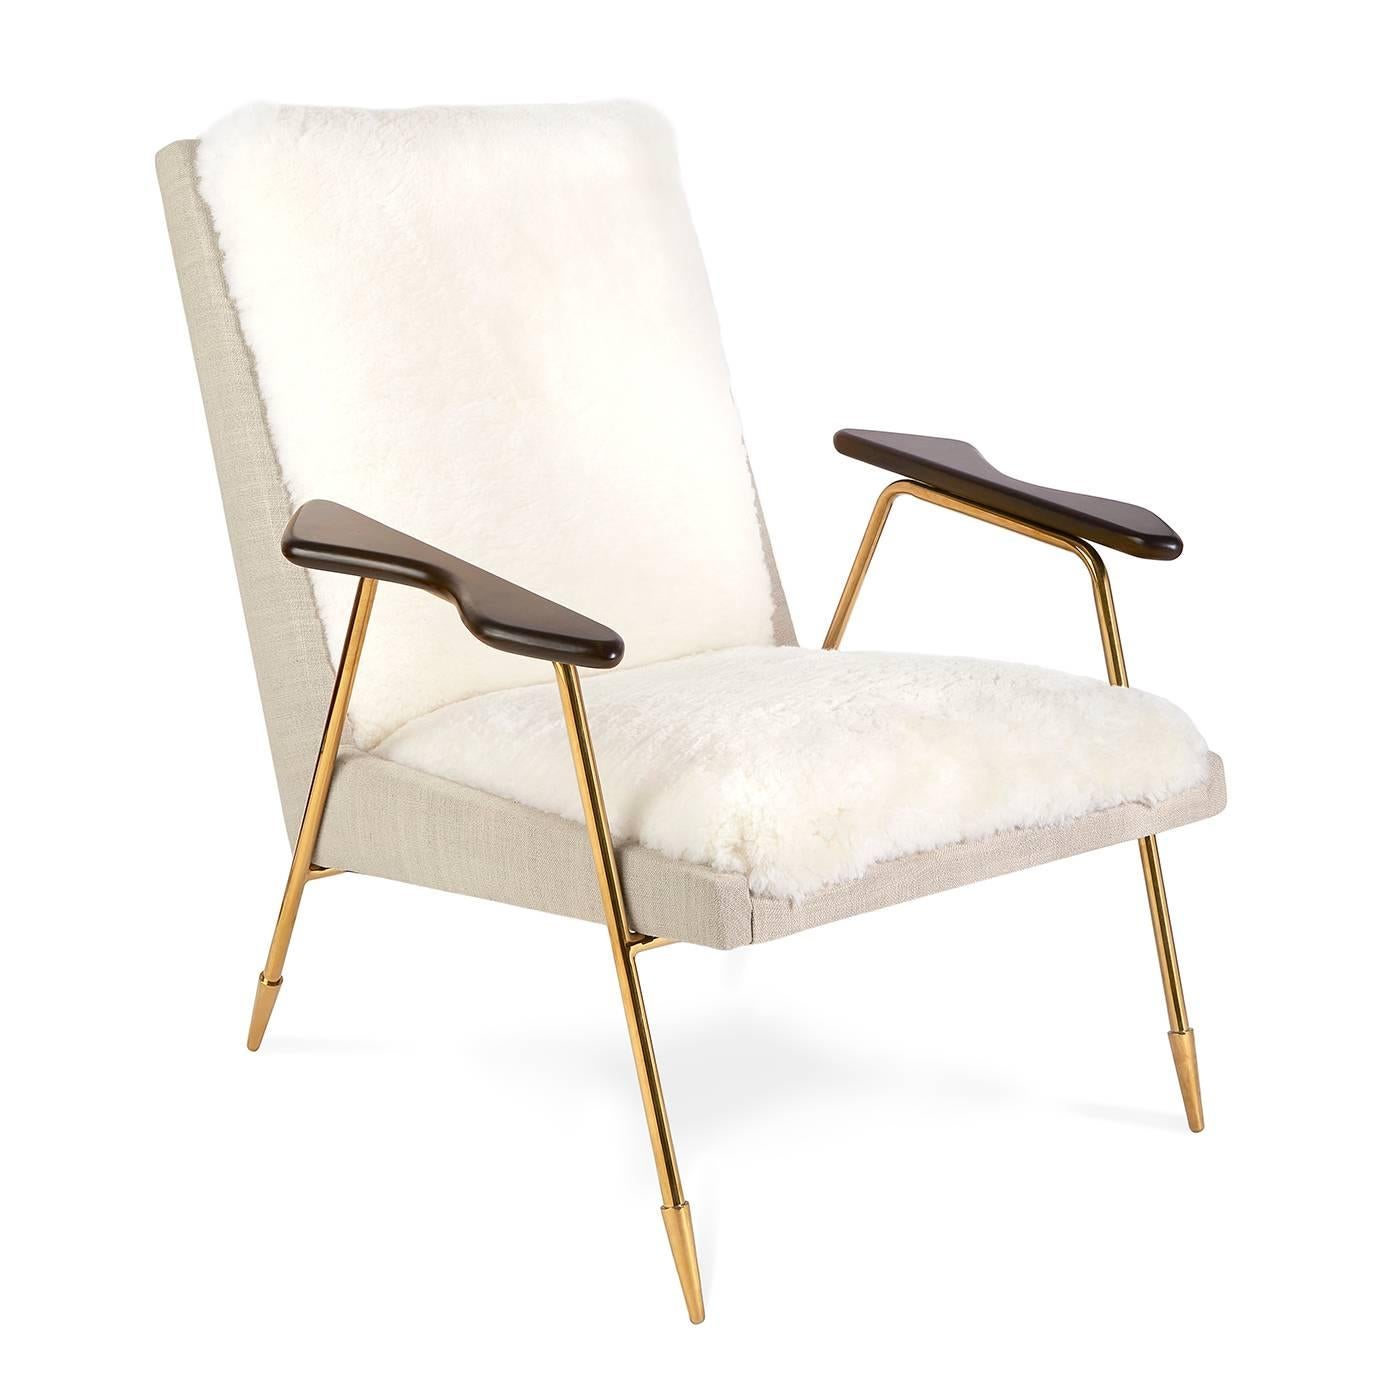 Scandi-Mod with an Italian flair. A delicious fusion of form and function. Features sculpted arm rests, natural linen sides and back, an exposed brass frame, and a shearling-lined seat for everyday luxe that's elemental to your décor. Signature